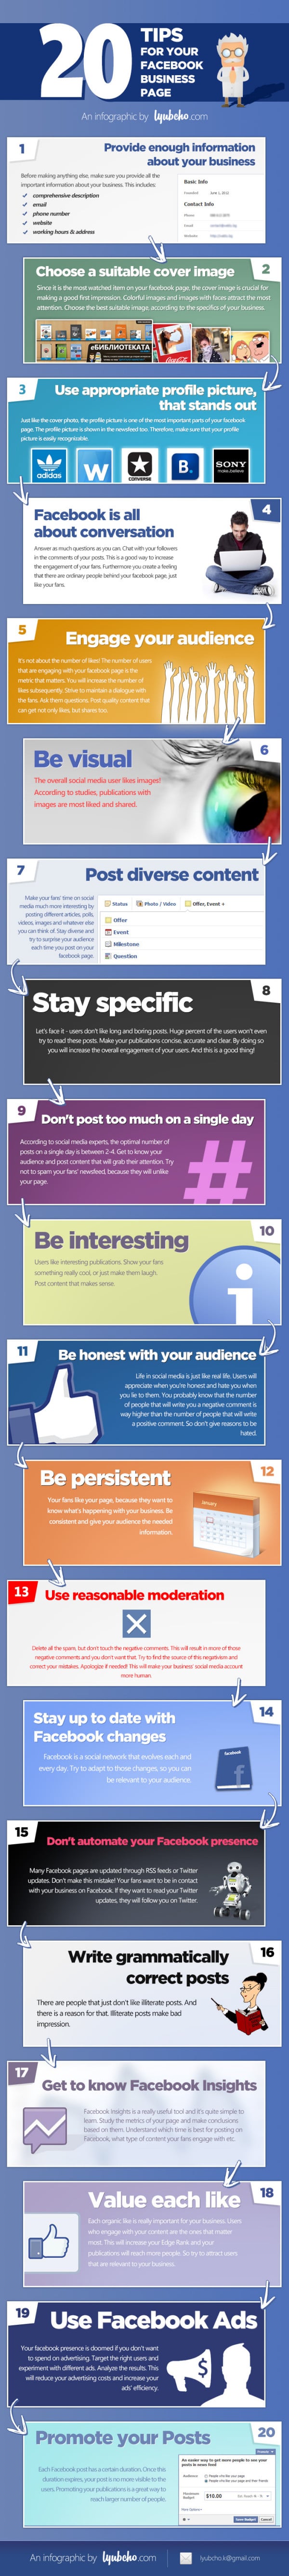 Killer Tips to Reach Target Audiences on Facebook Business Page